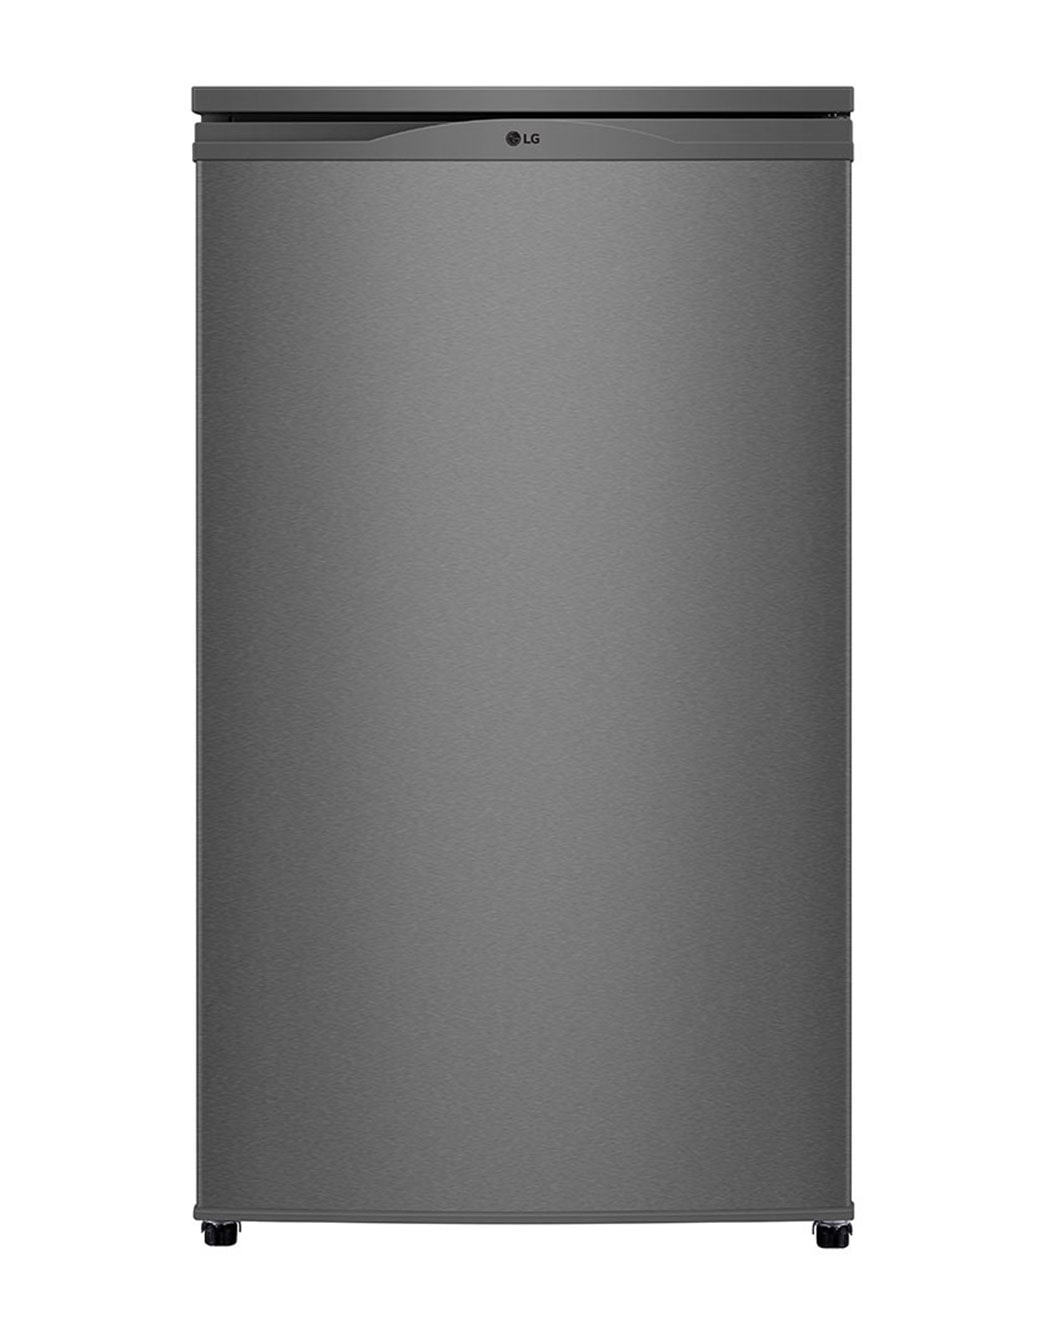 LG 33 in. W 24 cu. ft. Top Freezer Refrigerator w/ LED Lighteing and  Multi-Air Flow in Stainless Steel, ENERGY STAR LRTLS2403S - The Home Depot